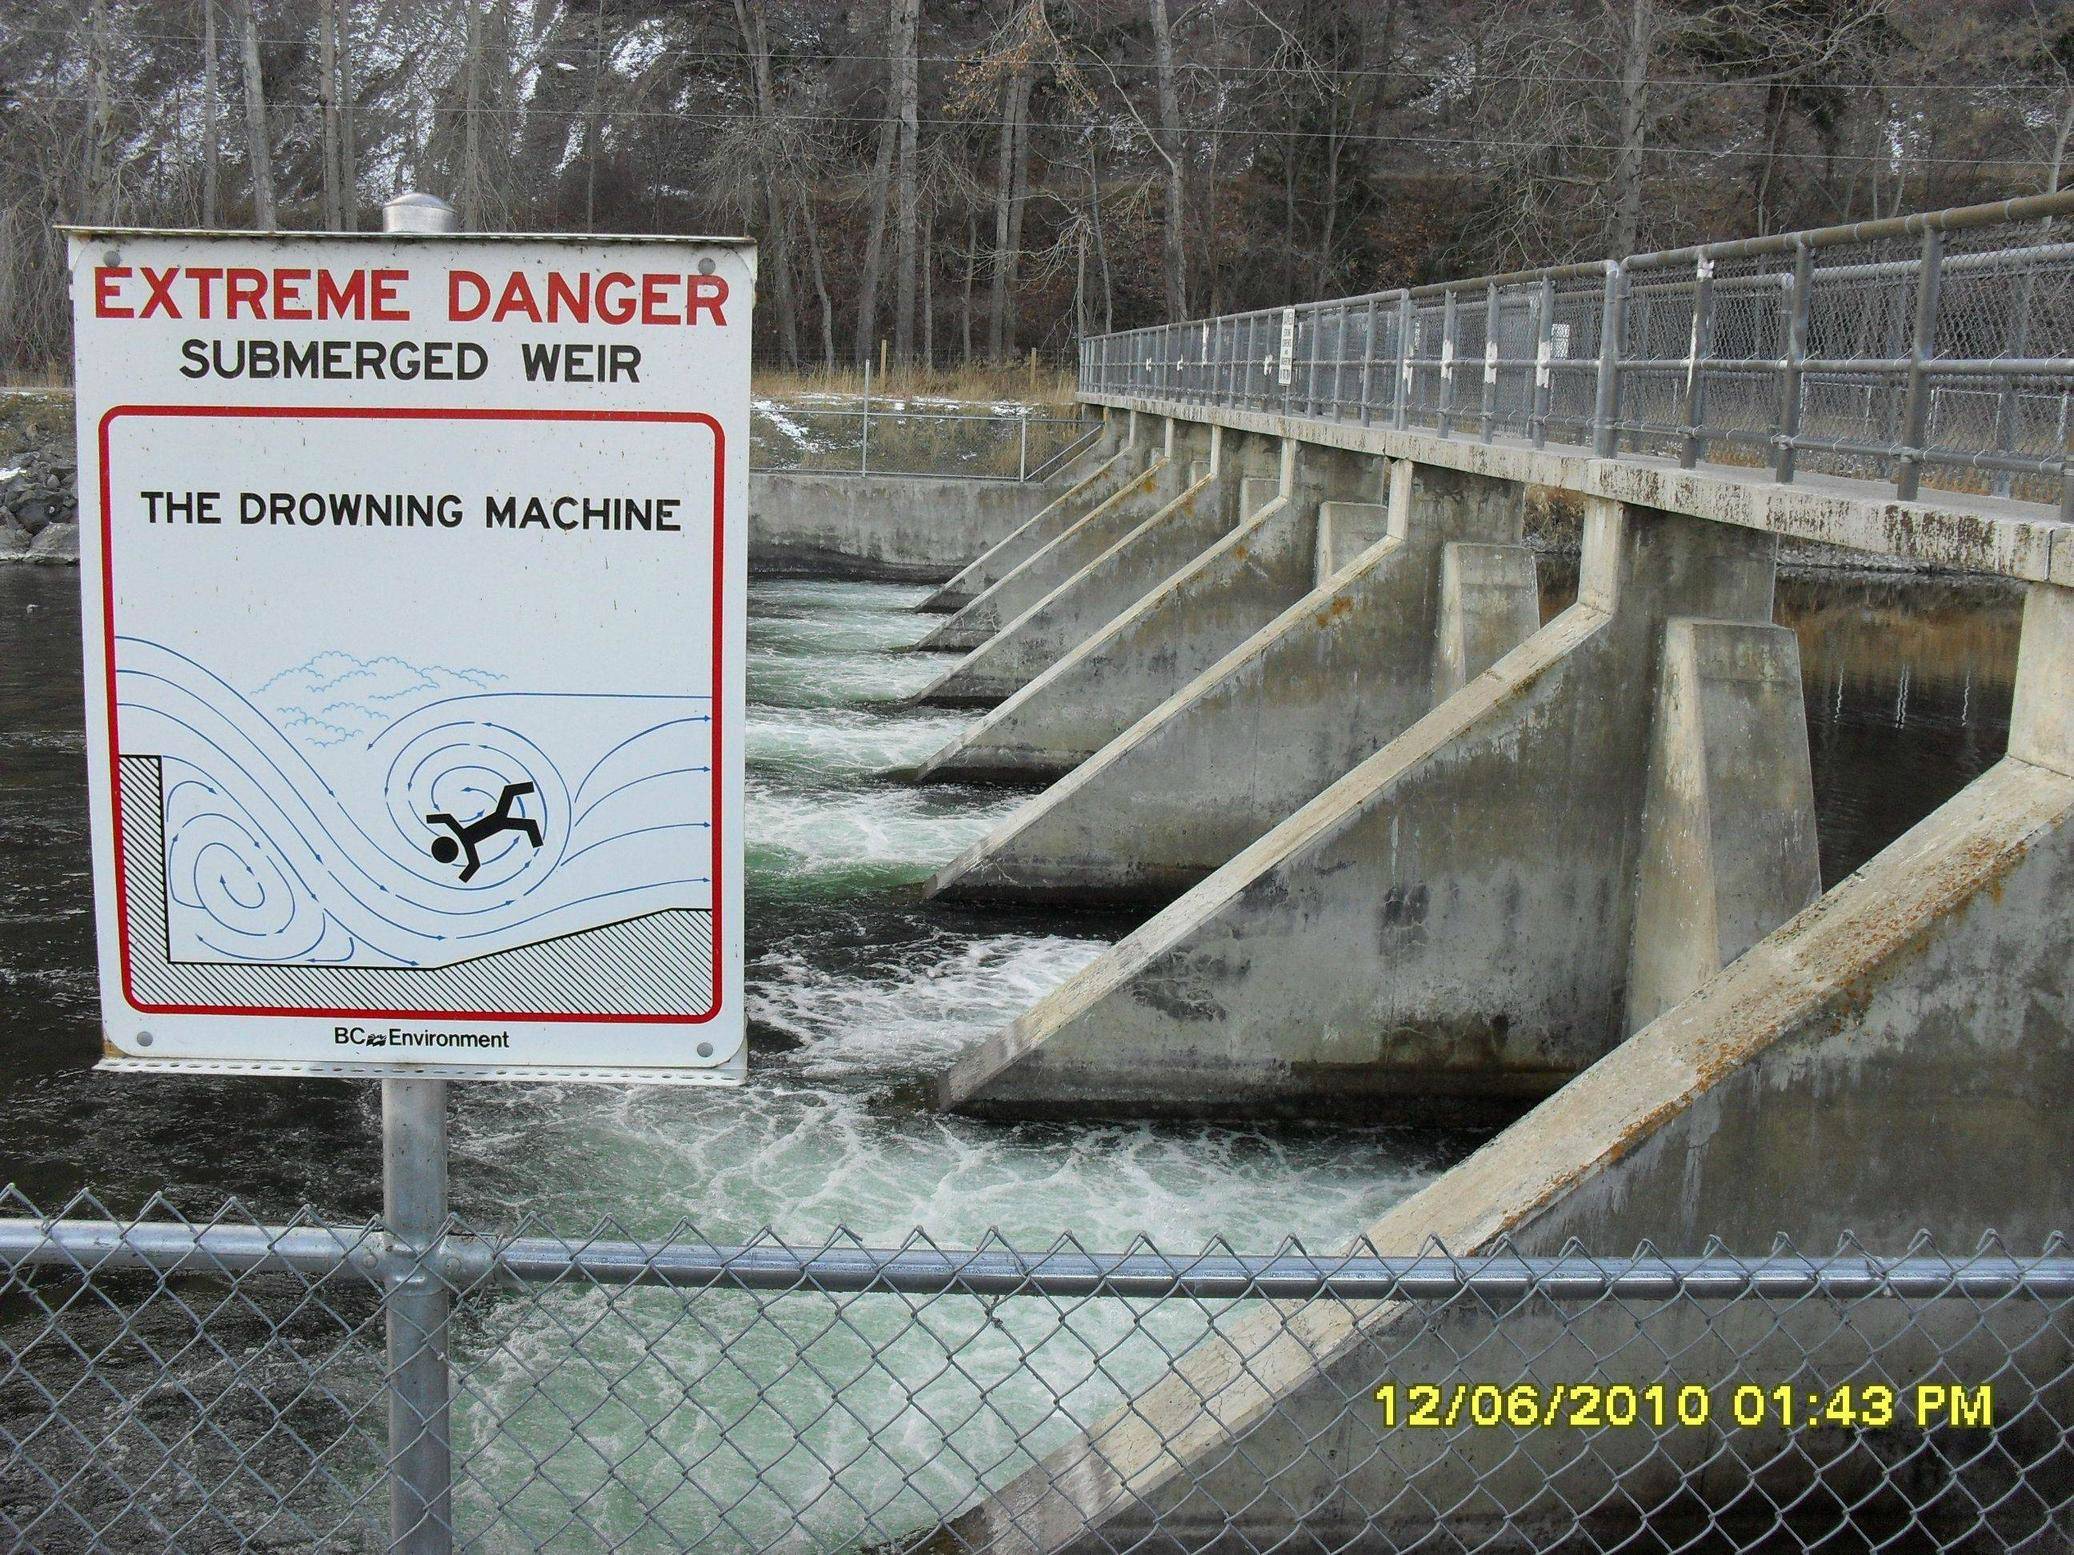 The Drowning Machine